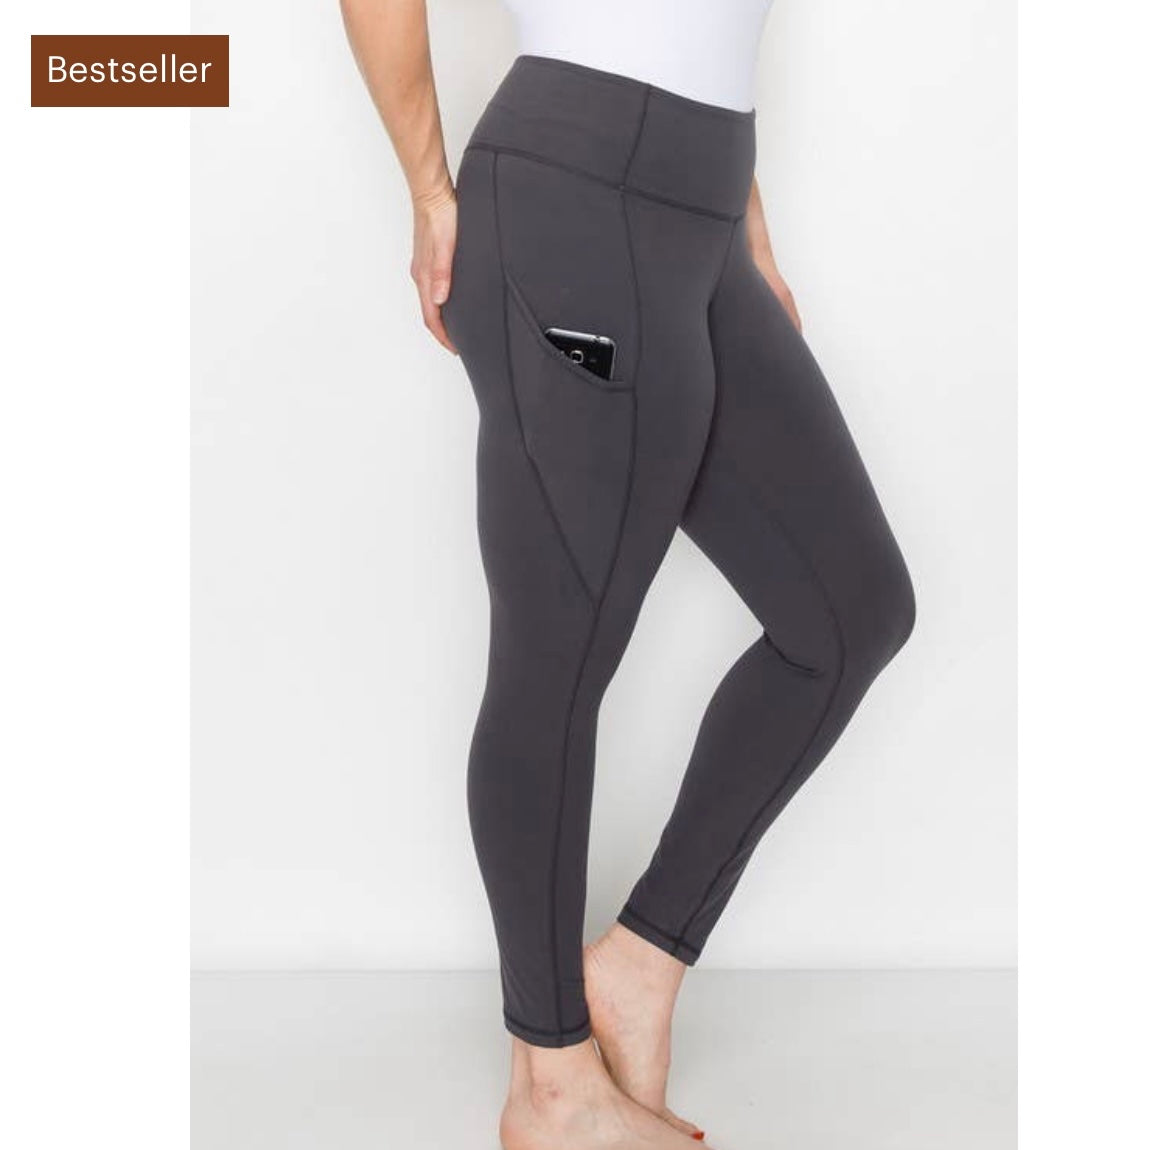  visesunny High Waist Yoga Pants with Pockets Blue Whale Buttery  Soft Tummy Control Running Workout Pants 4 Way Stretch Pocket Leggings :  Clothing, Shoes & Jewelry